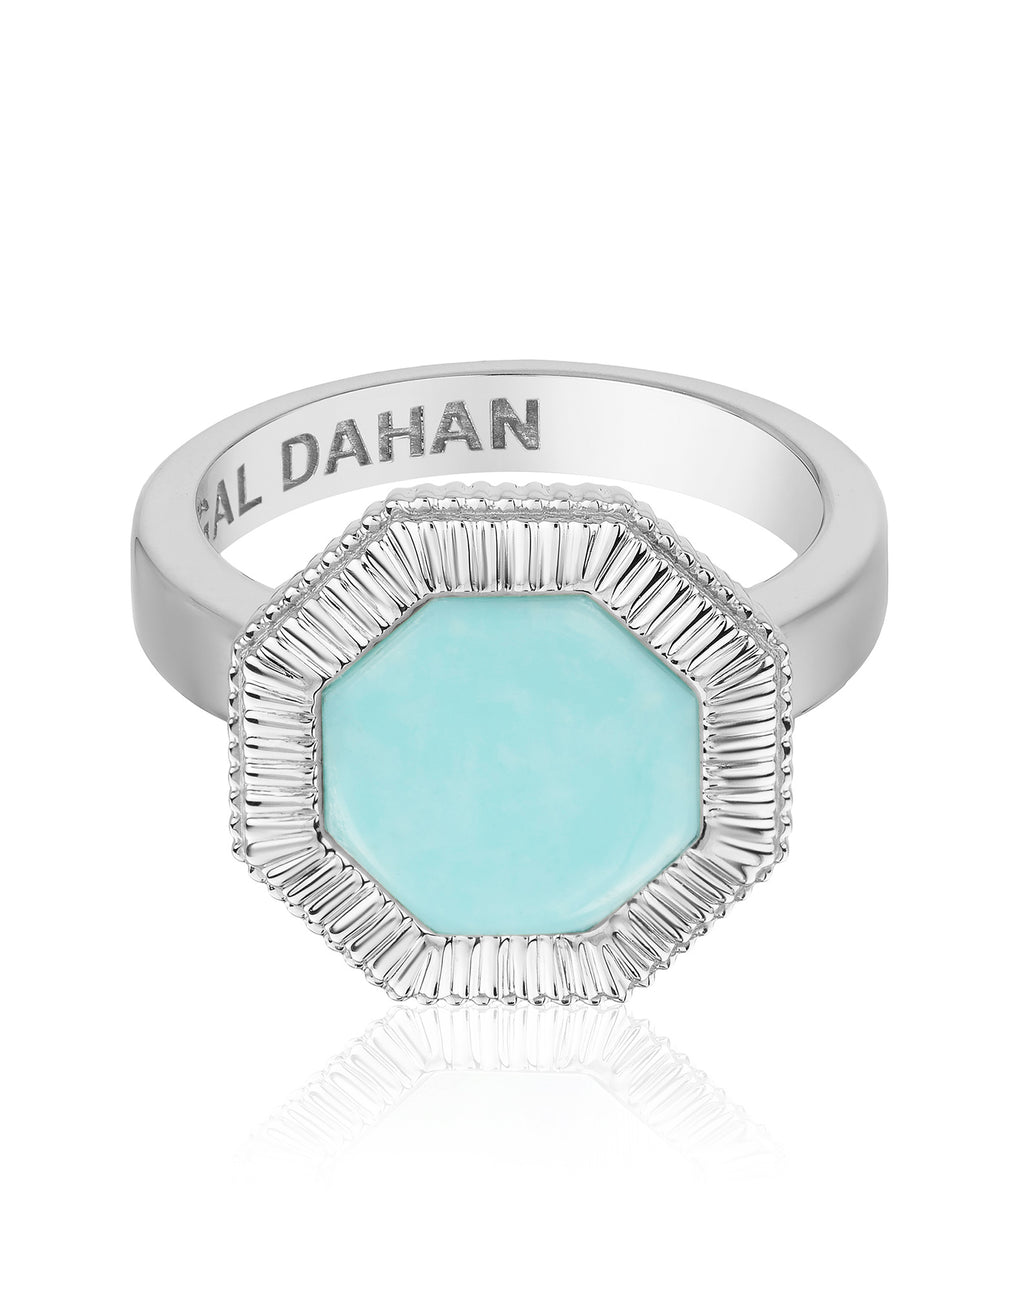 Octaday Ring with Turquoise